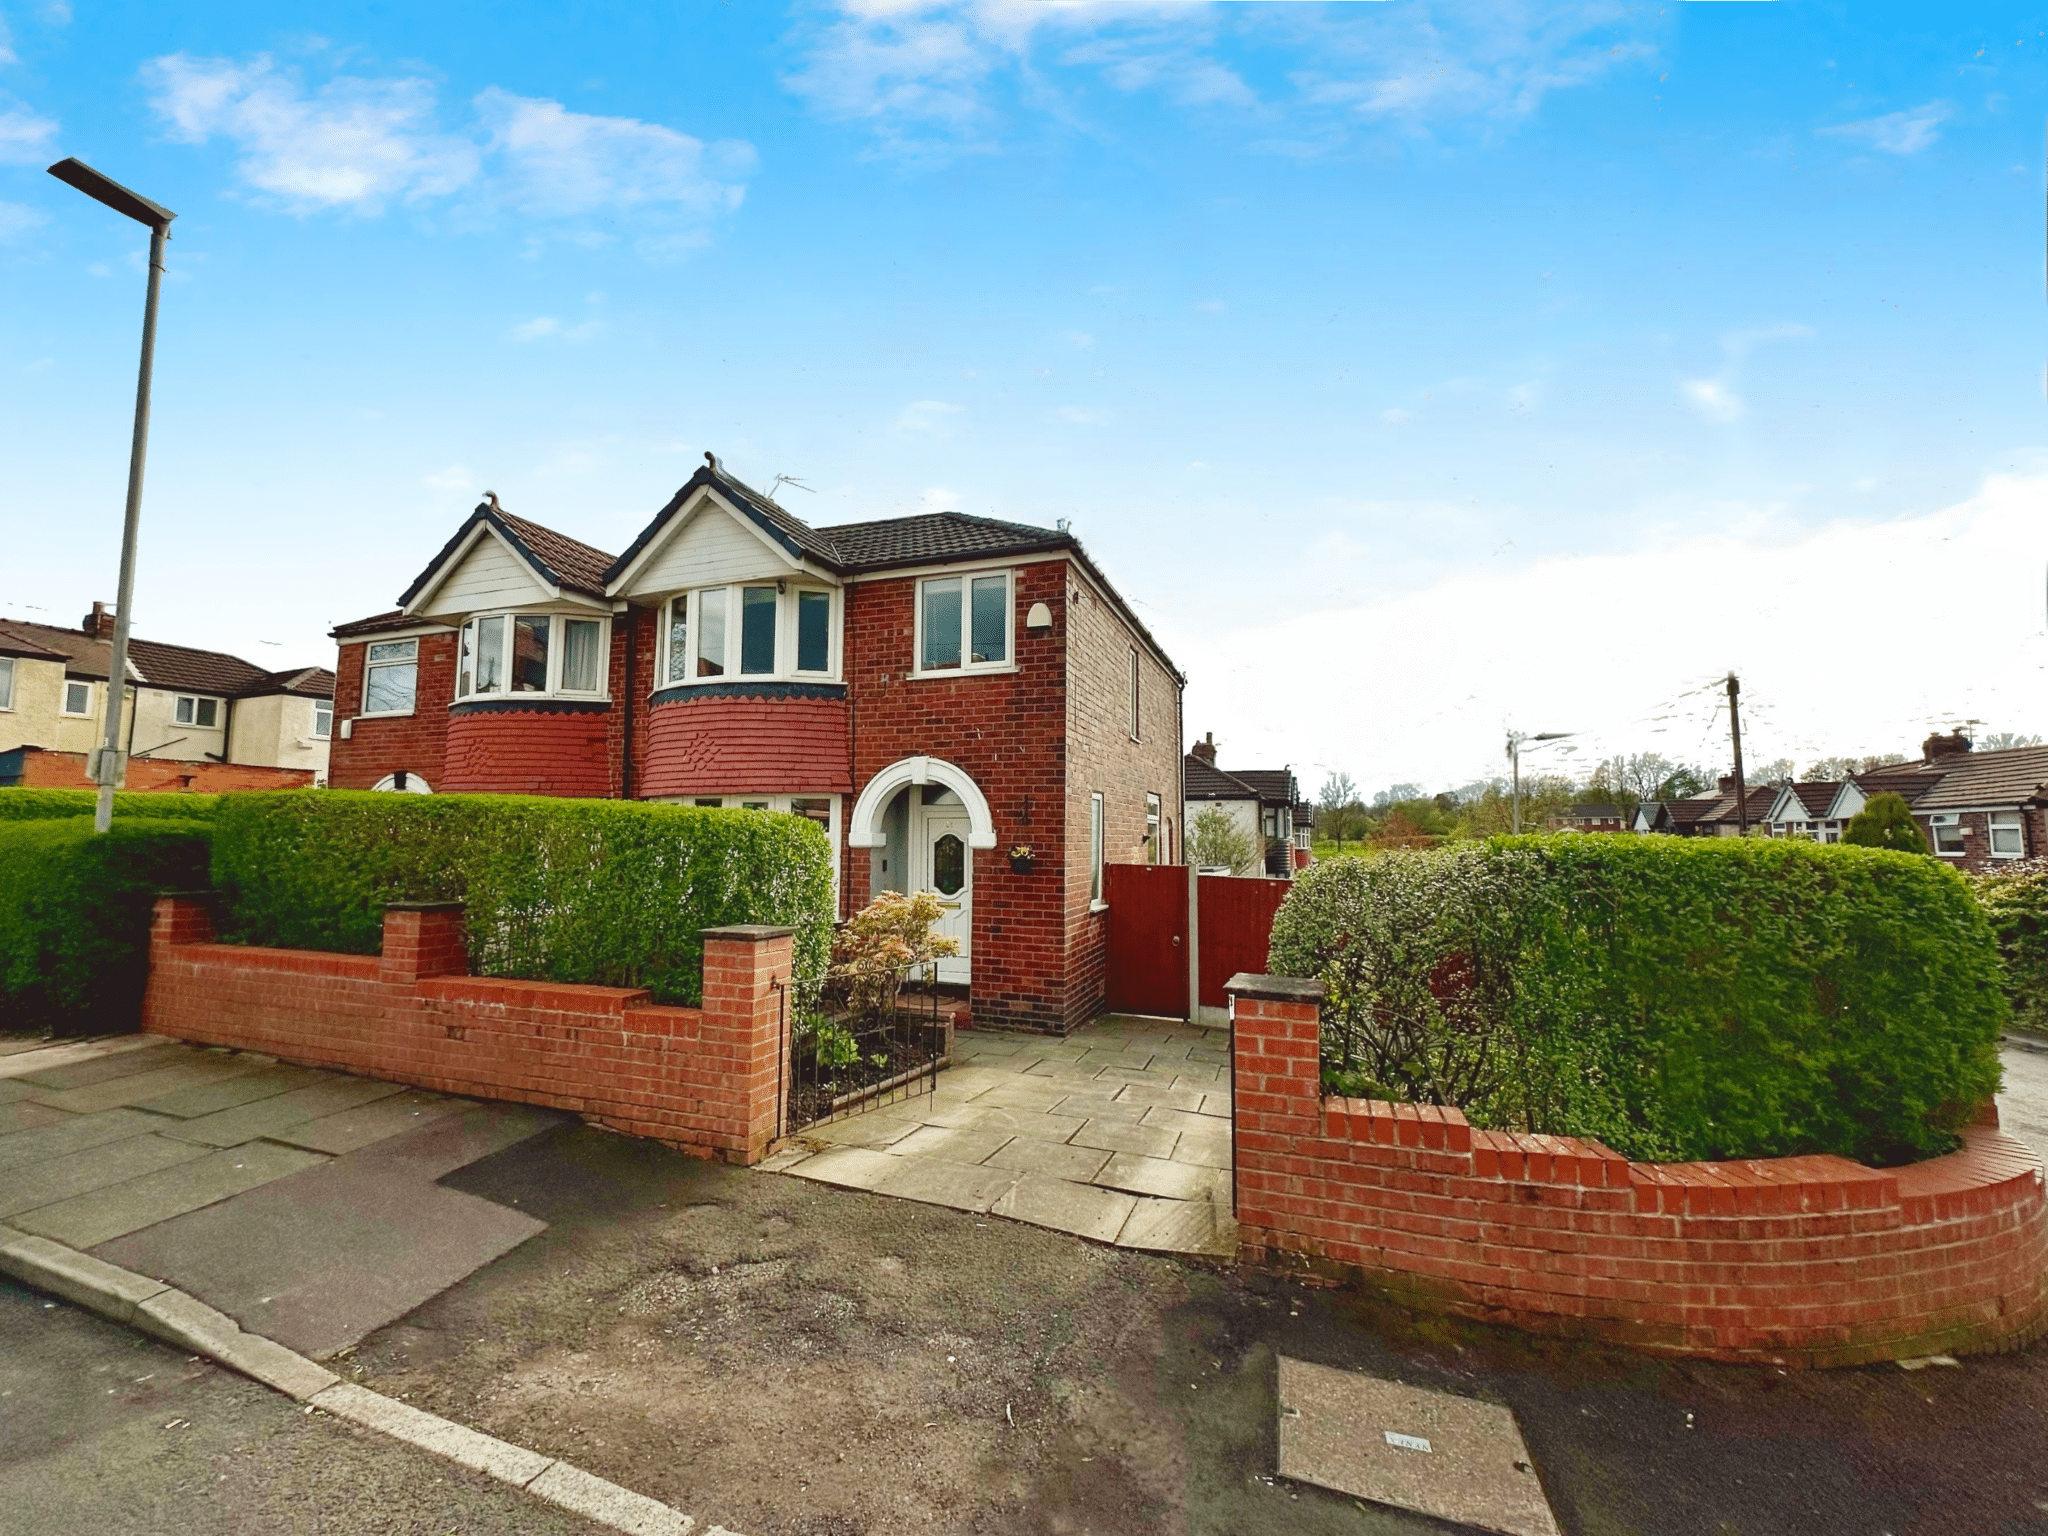 Stanway Road, Whitefield, Manchester, Manchester, M45 8HD